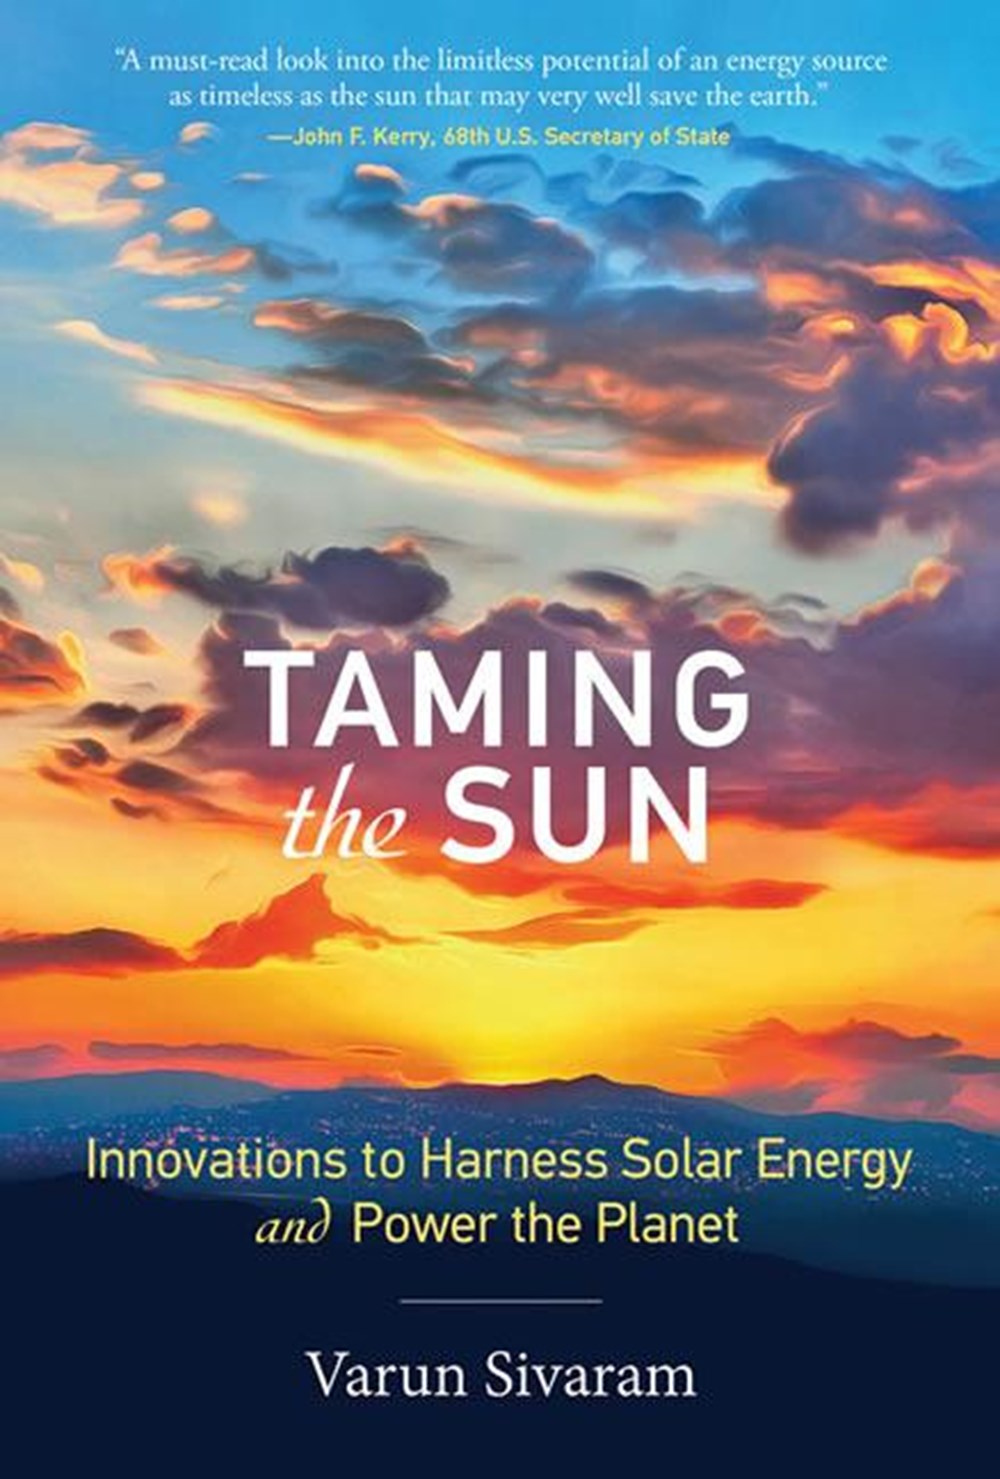 Taming the Sun: Innovations to Harness Solar Energy and Power the Planet